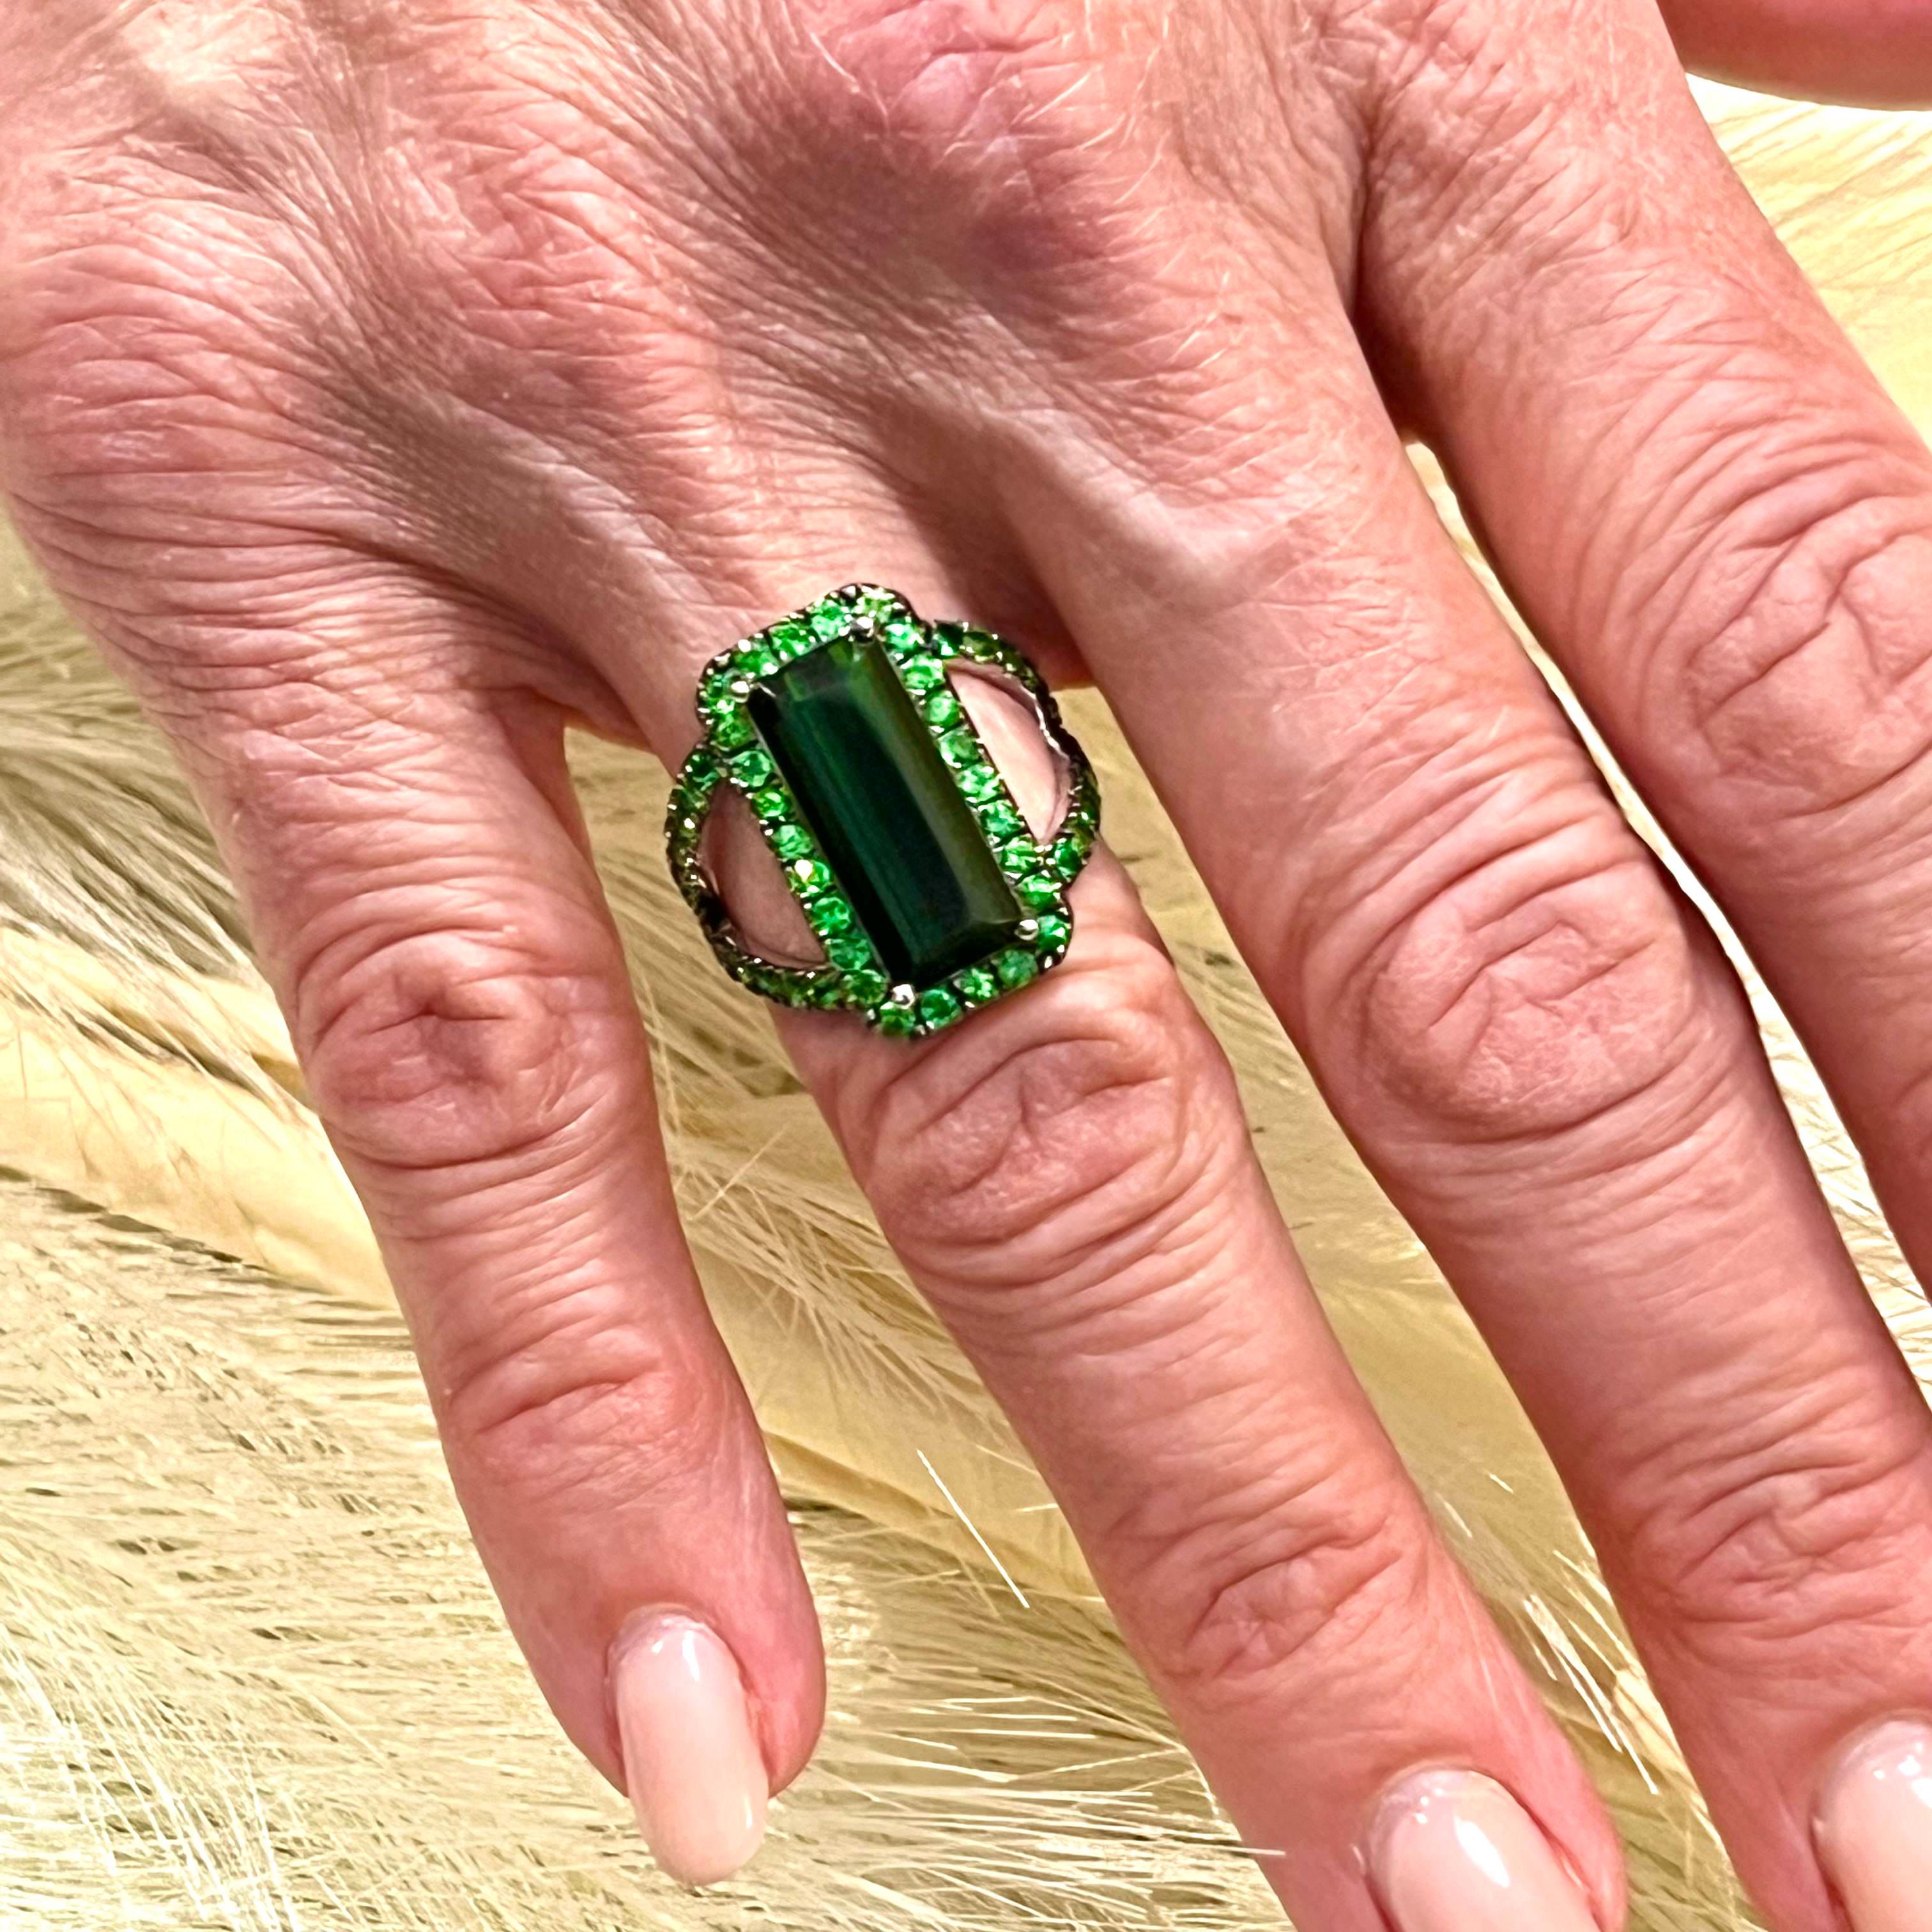 Finely Faceted Quality Natural Tourmaline Tsavorite Ring 7 14k Gold 6.77 TCW Certified $5,950 300690

This is a one of a Kind Unique Custom Made Glamorous Piece of Jewelry!

Nothing says, “I Love you” more than Diamonds and Pearls!

This item has